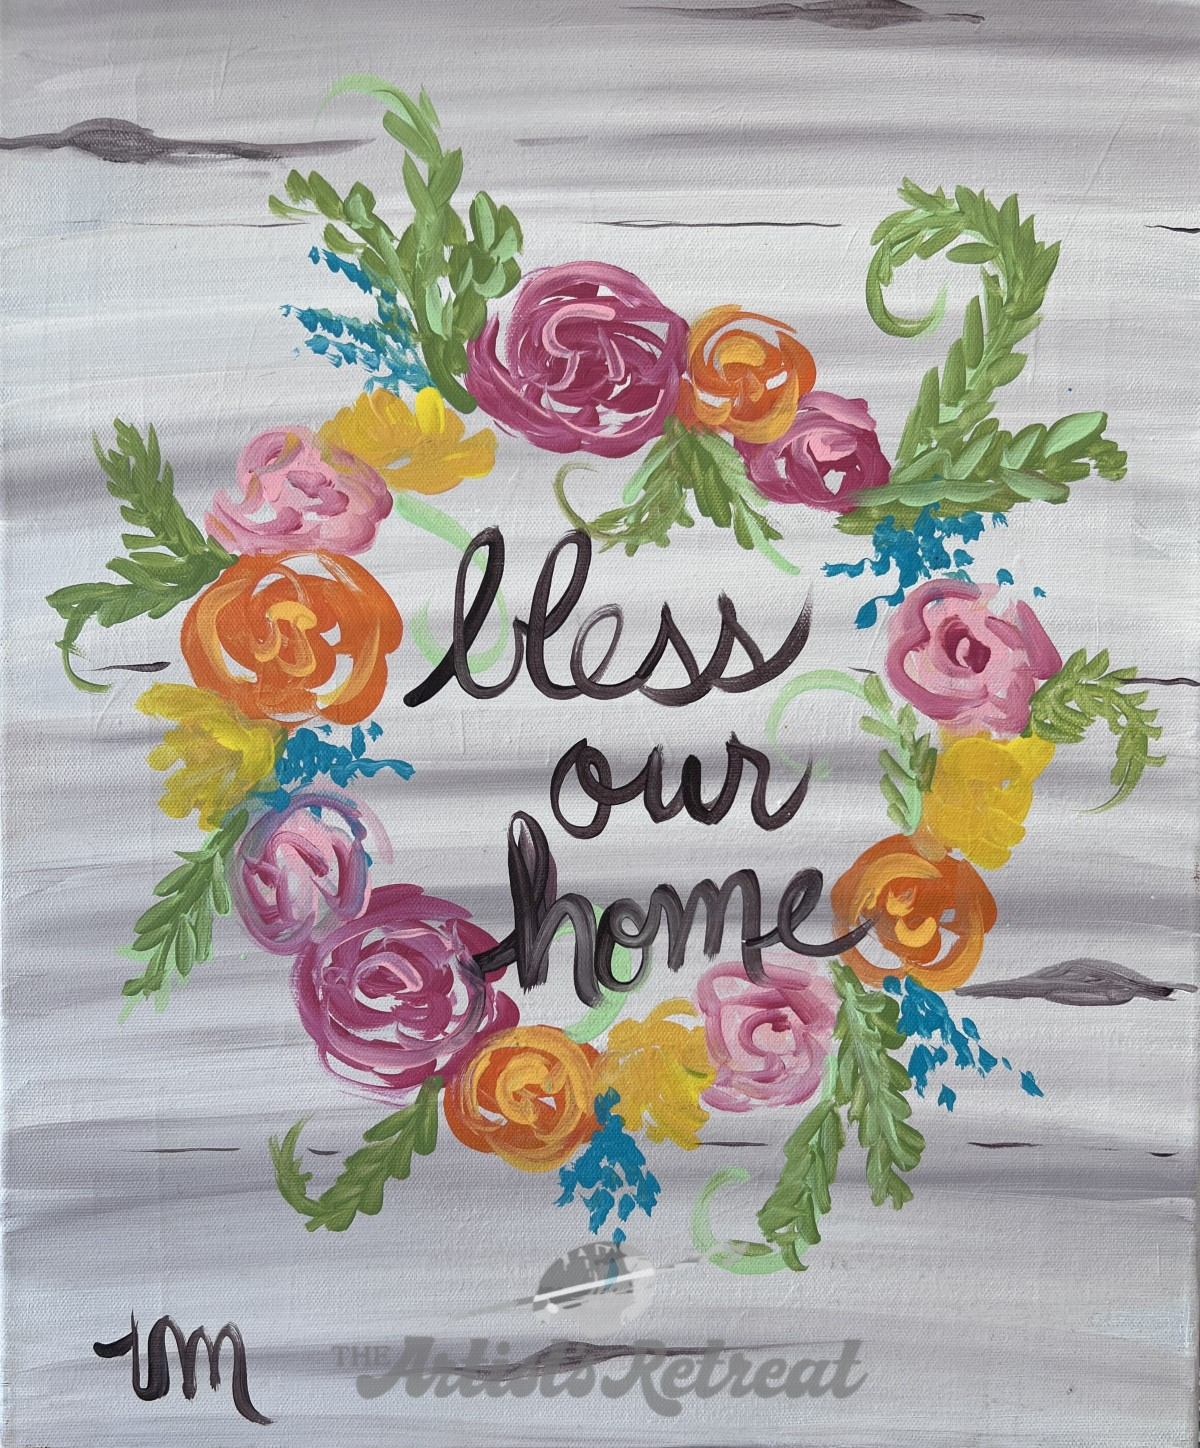 Bless Our Home - The Artist's Retreat